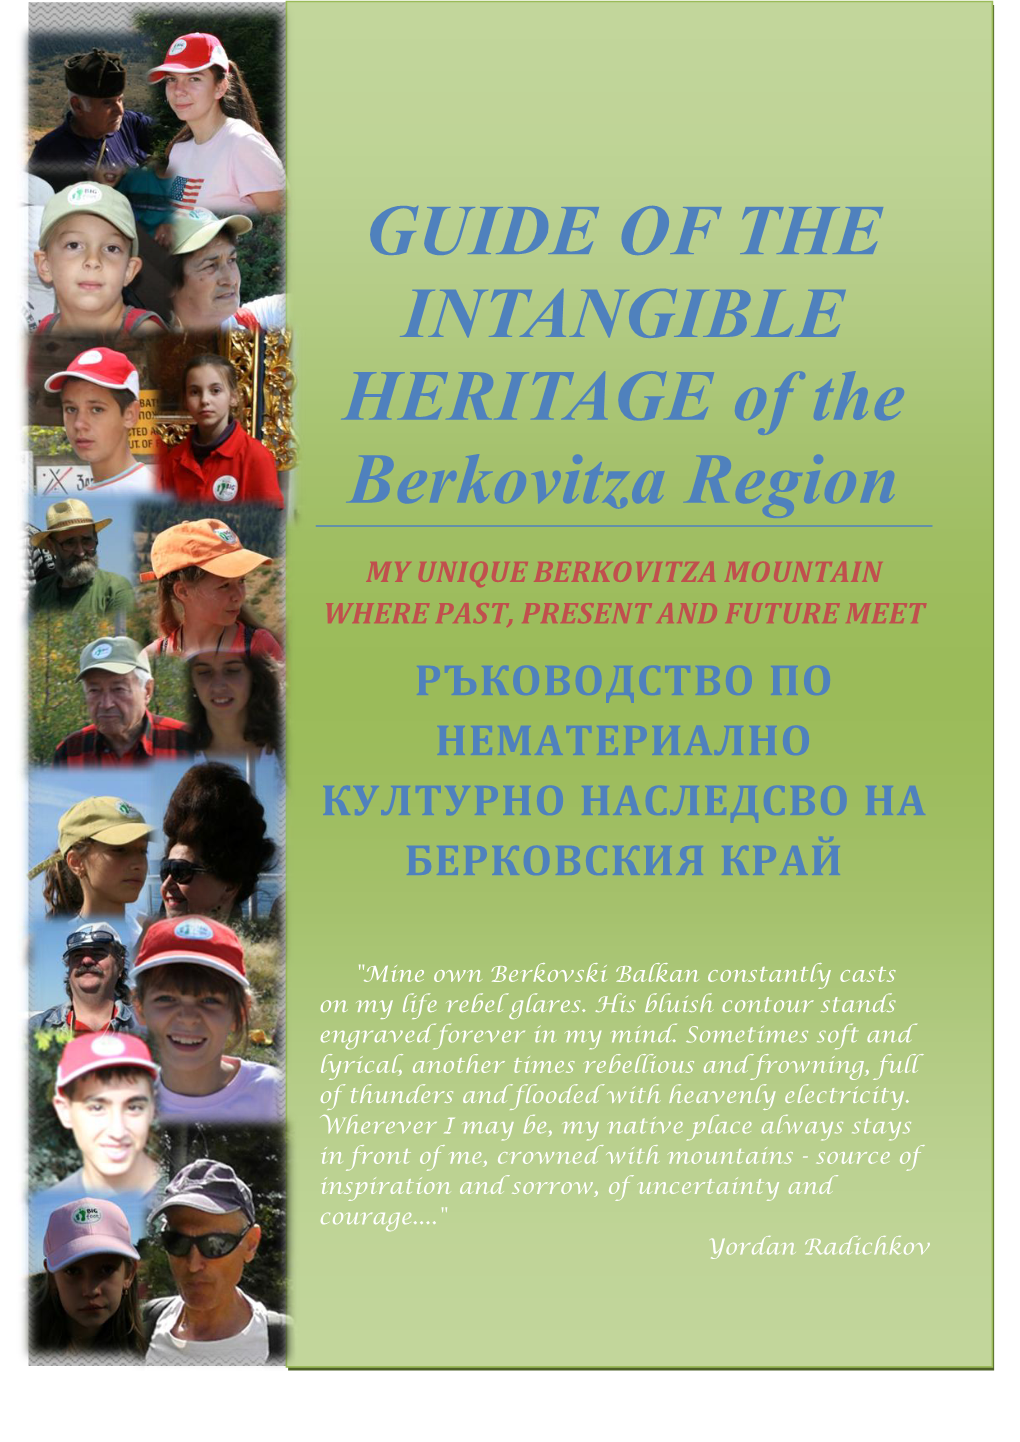 GUIDE of the INTANGIBLE HERITAGE of the Berkovitza Region